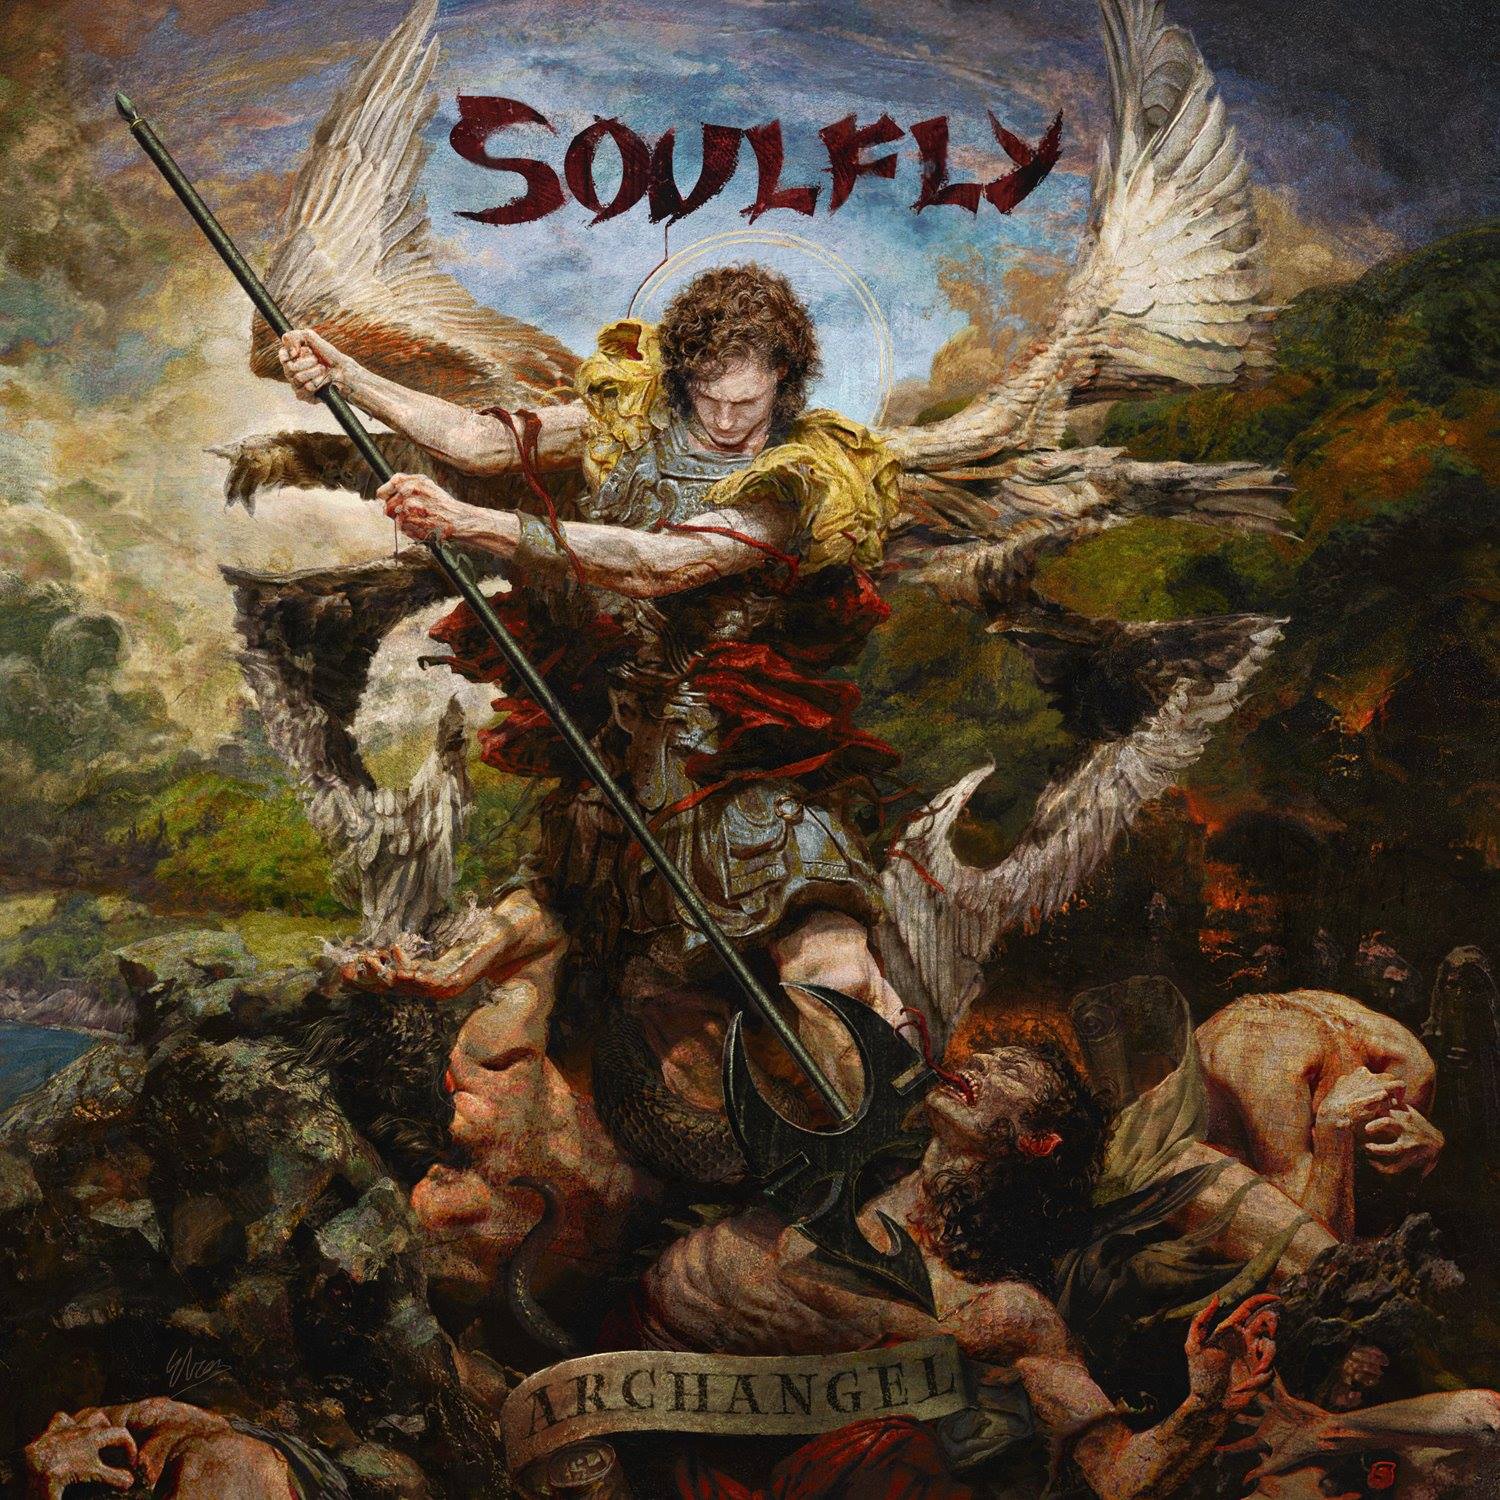 Soulfly – Archangel Review